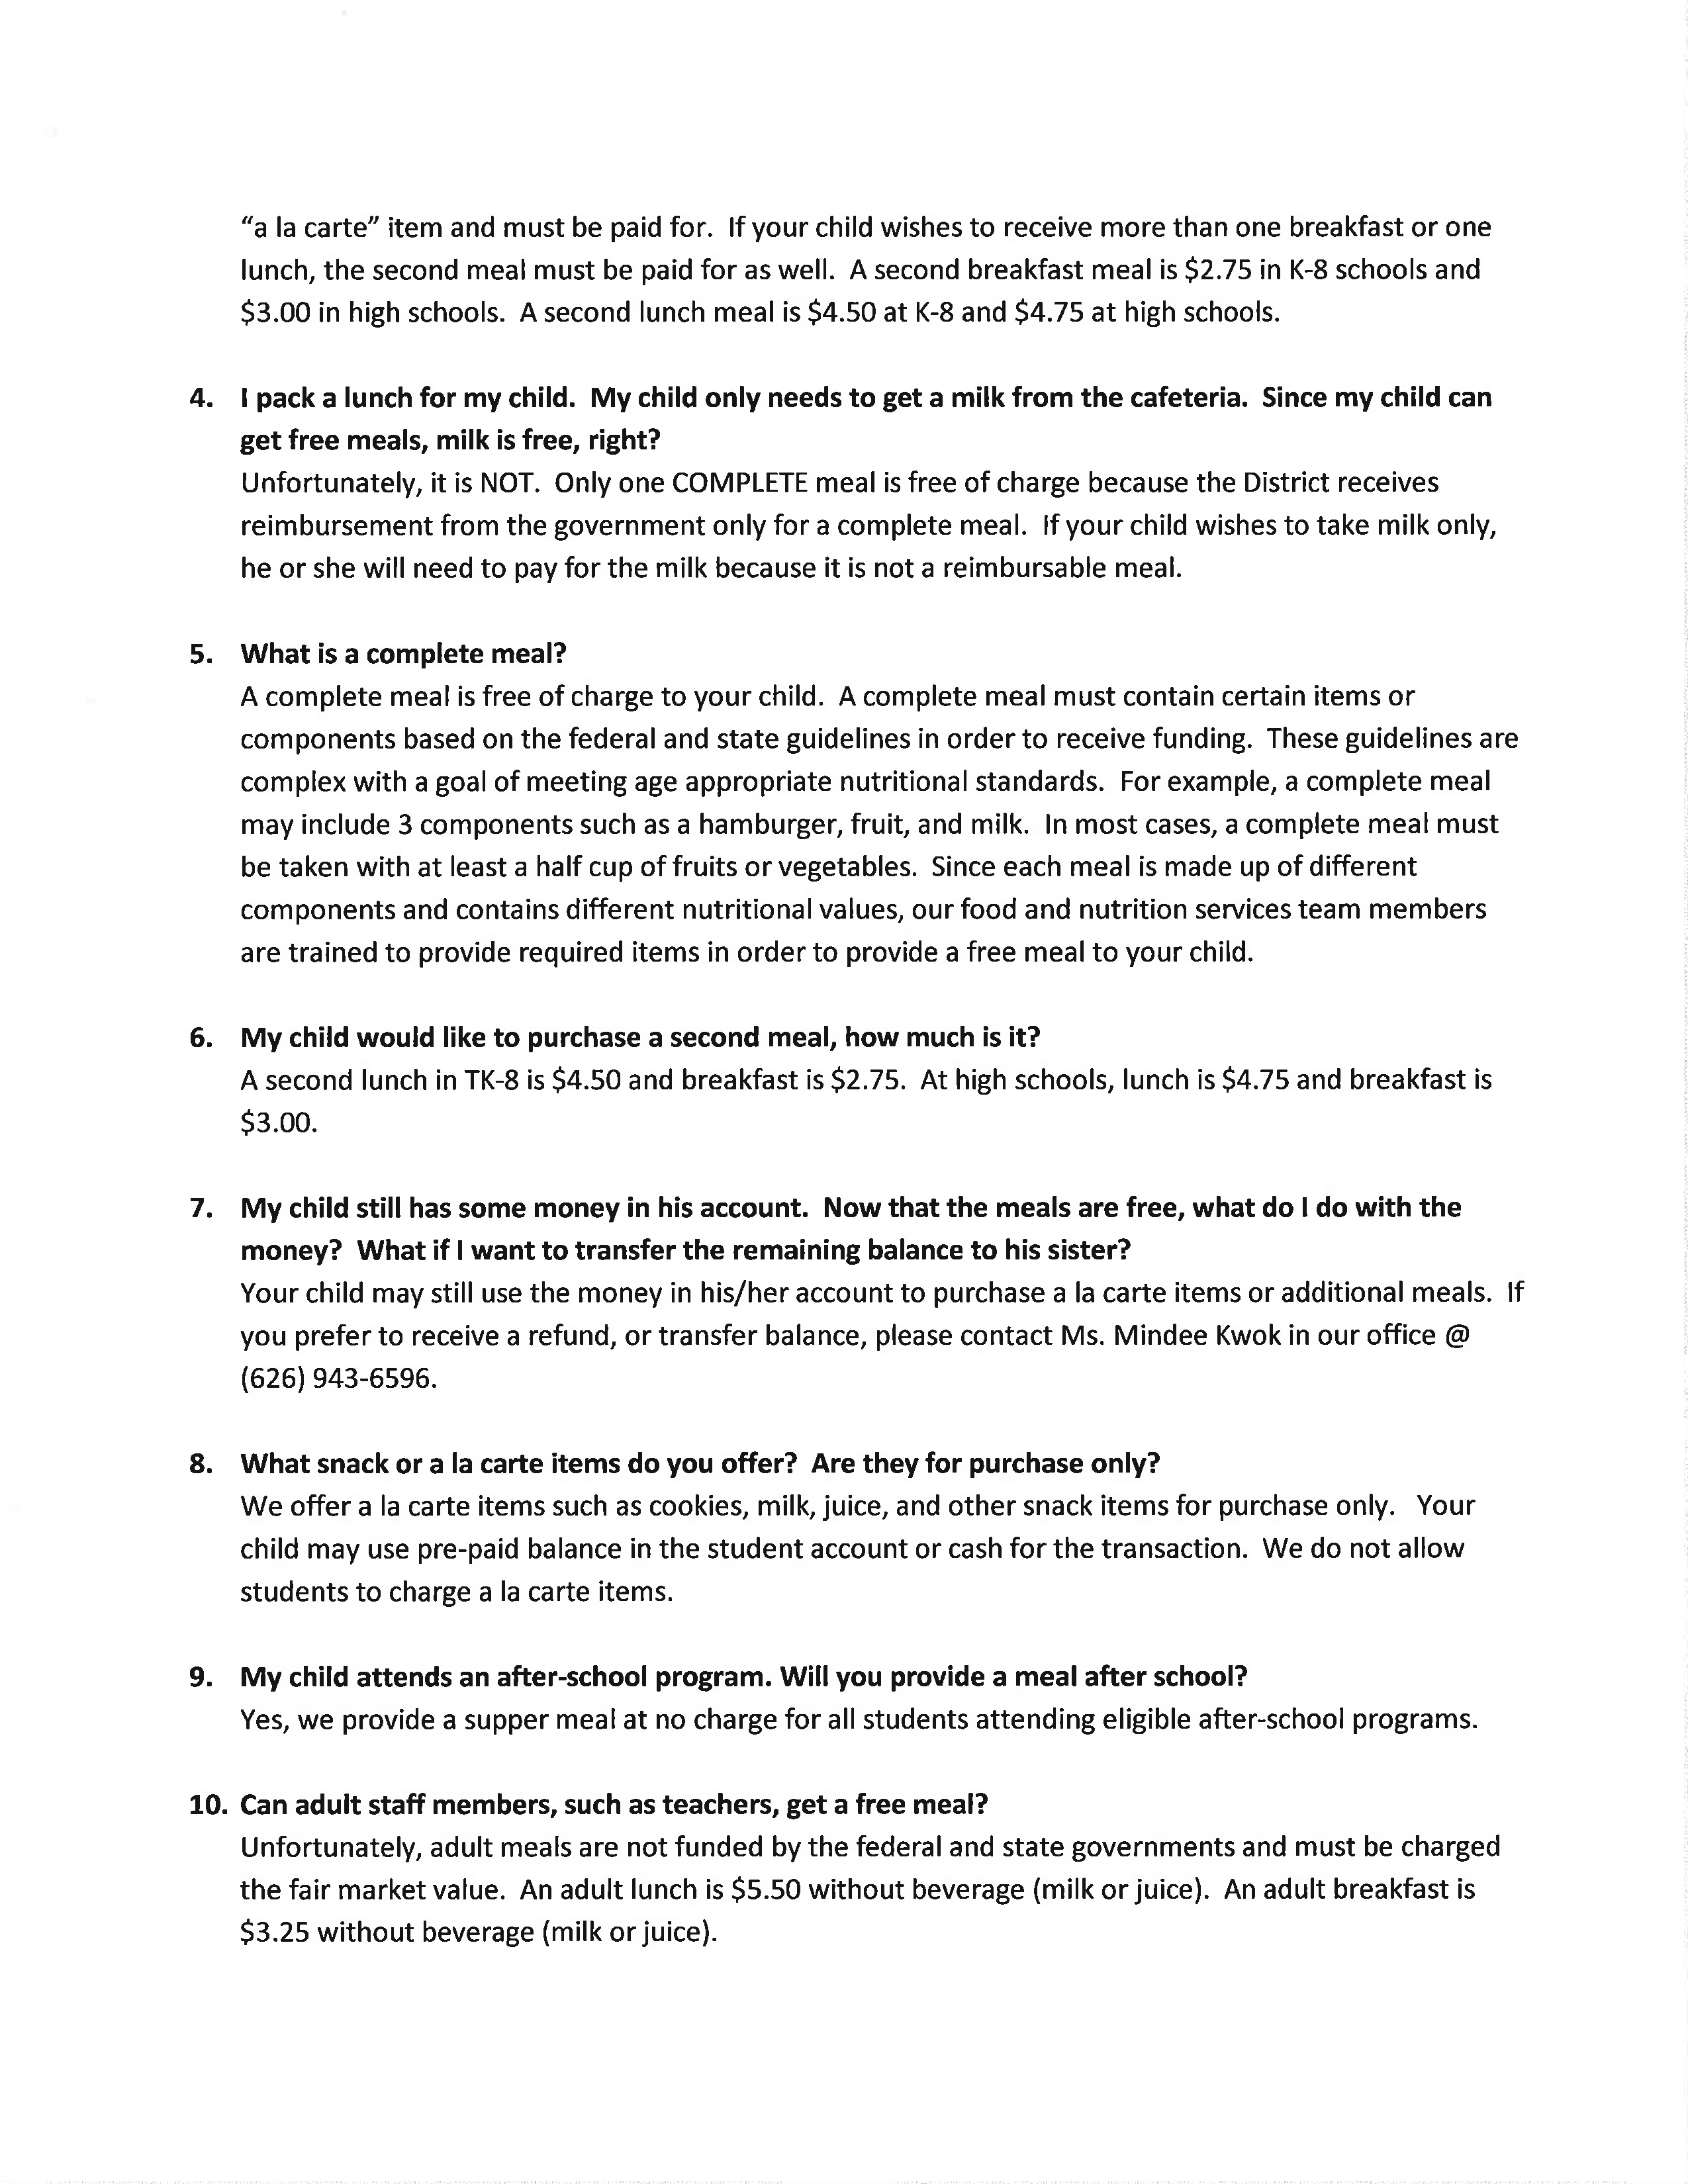 23-24 Letter to Parents with Q & A-2.jpg